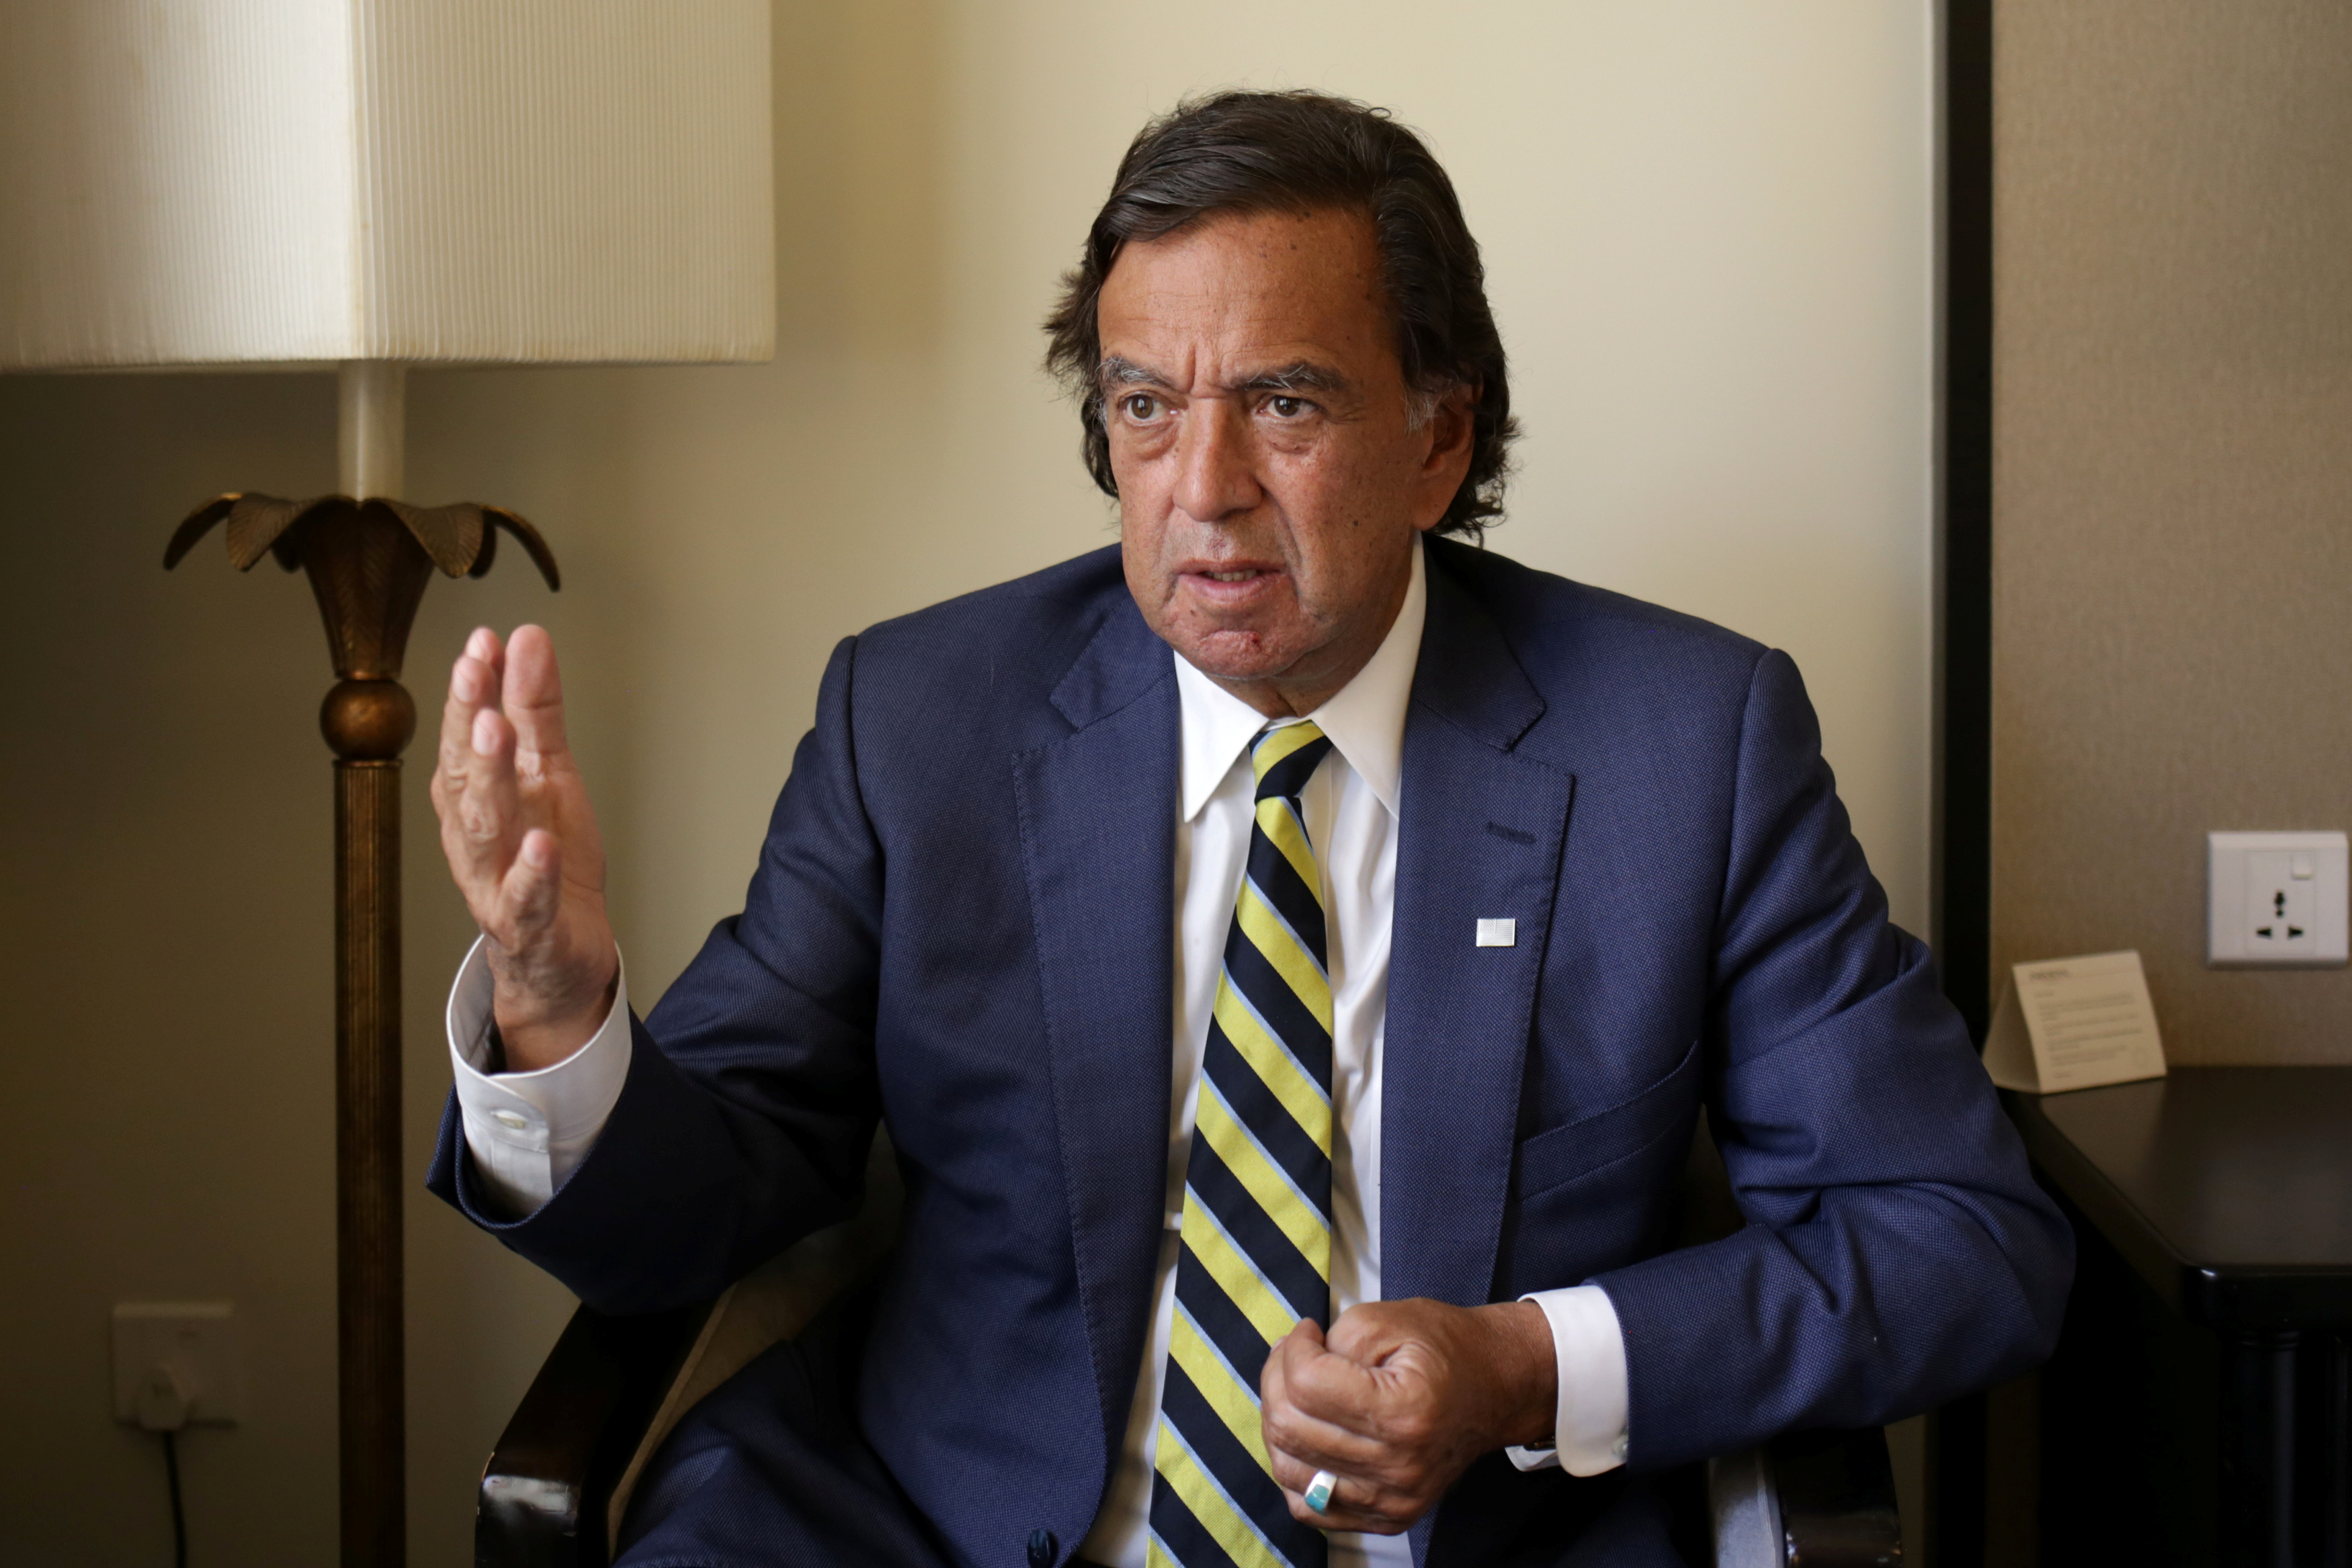 Former New Mexico governor Bill Richardson speaks during an interview in Yangon, Myanmar on Jan. 24, 2018. (Ann Wang—Reuters)